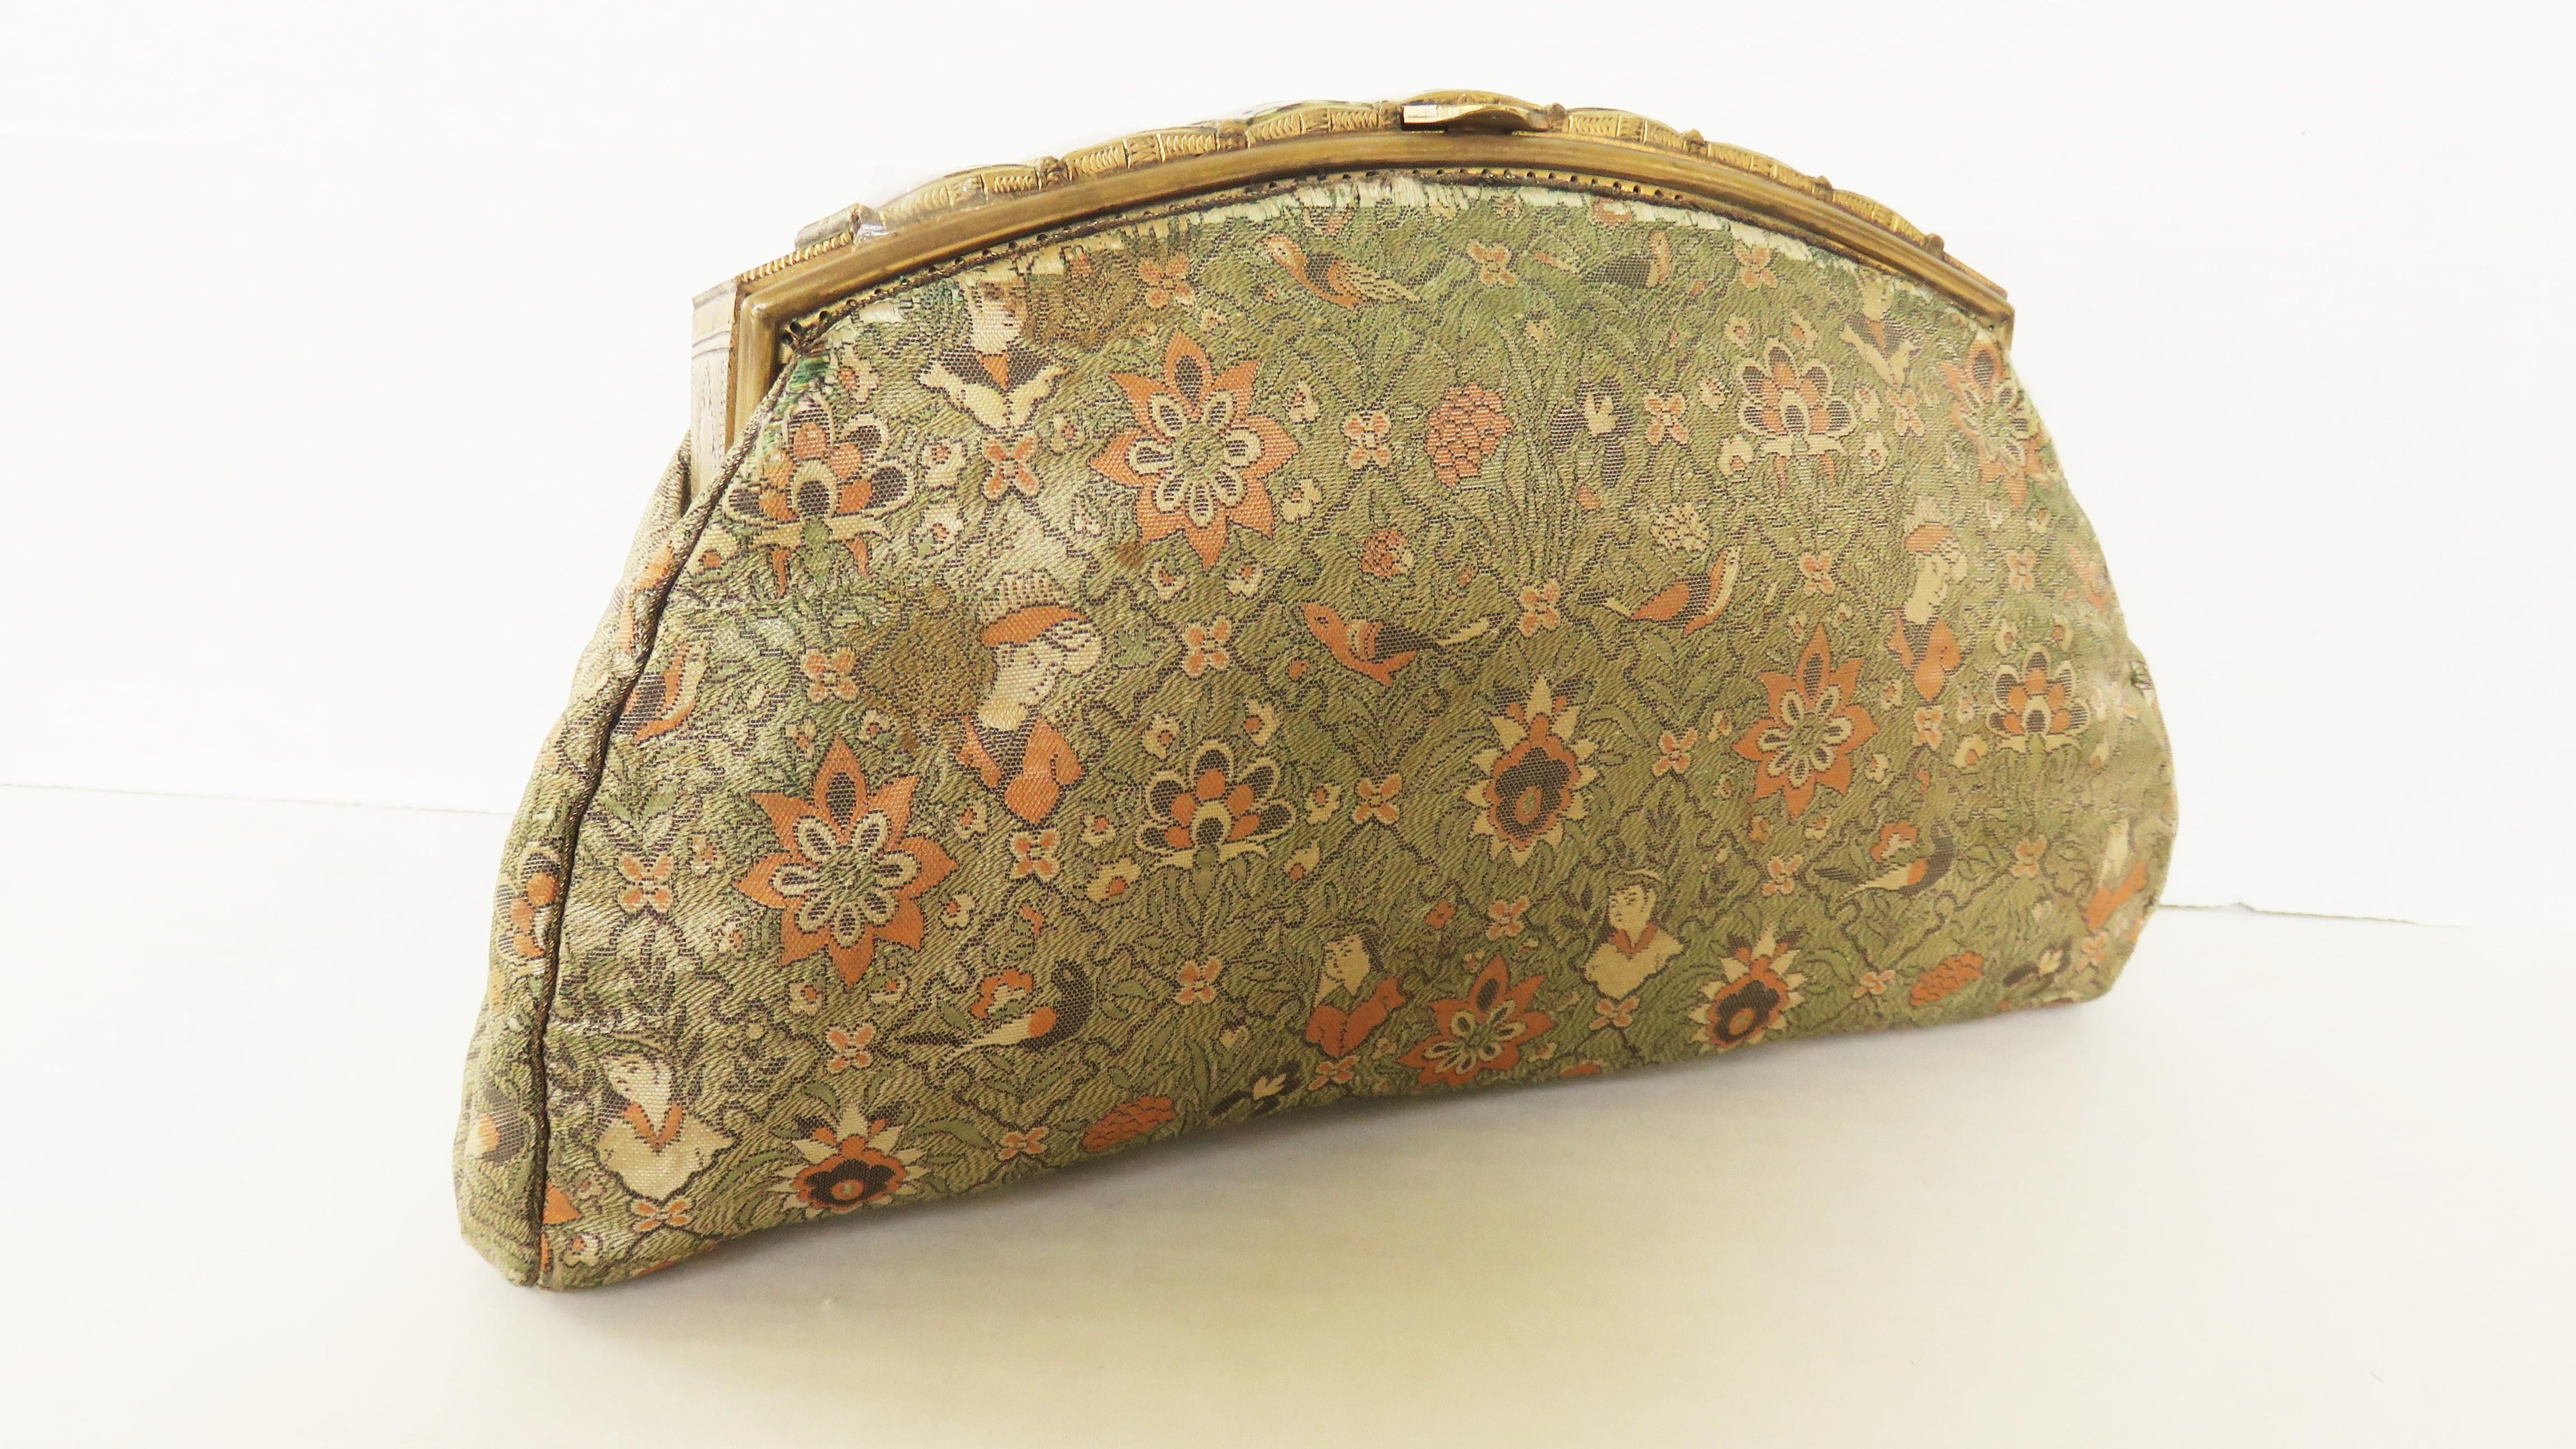 Asian Figure Motif Brocade Clutch with Painted Figures Tile Top 1930s For Sale 5